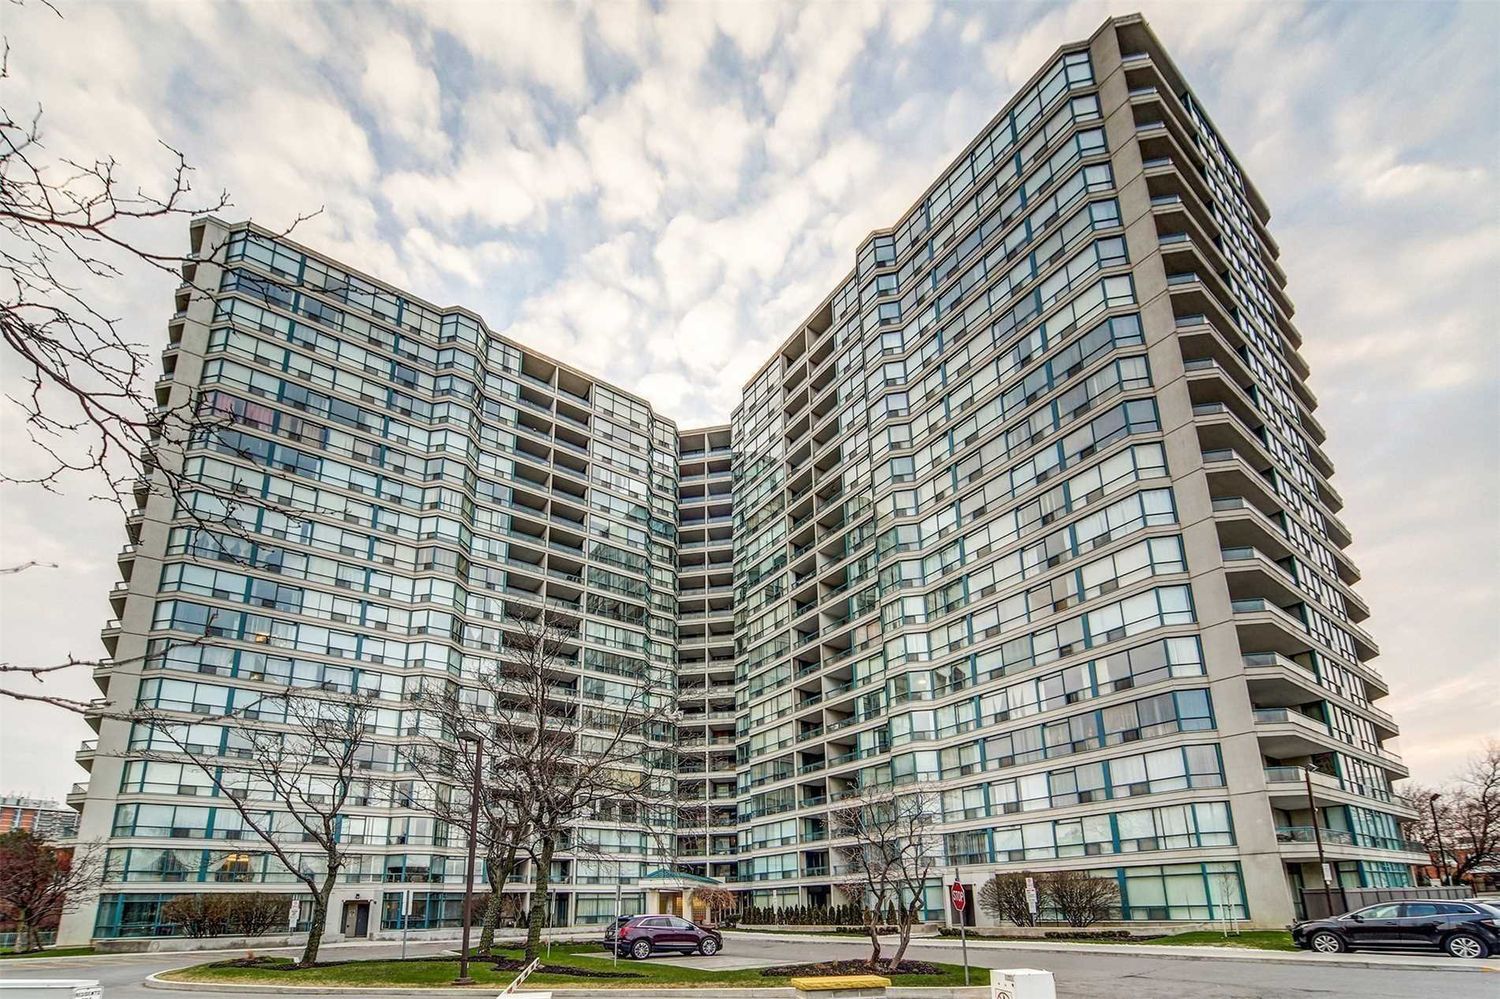 4725 Sheppard Avenue E. 4725 Sheppard Condos is located in  Scarborough, Toronto - image #1 of 3